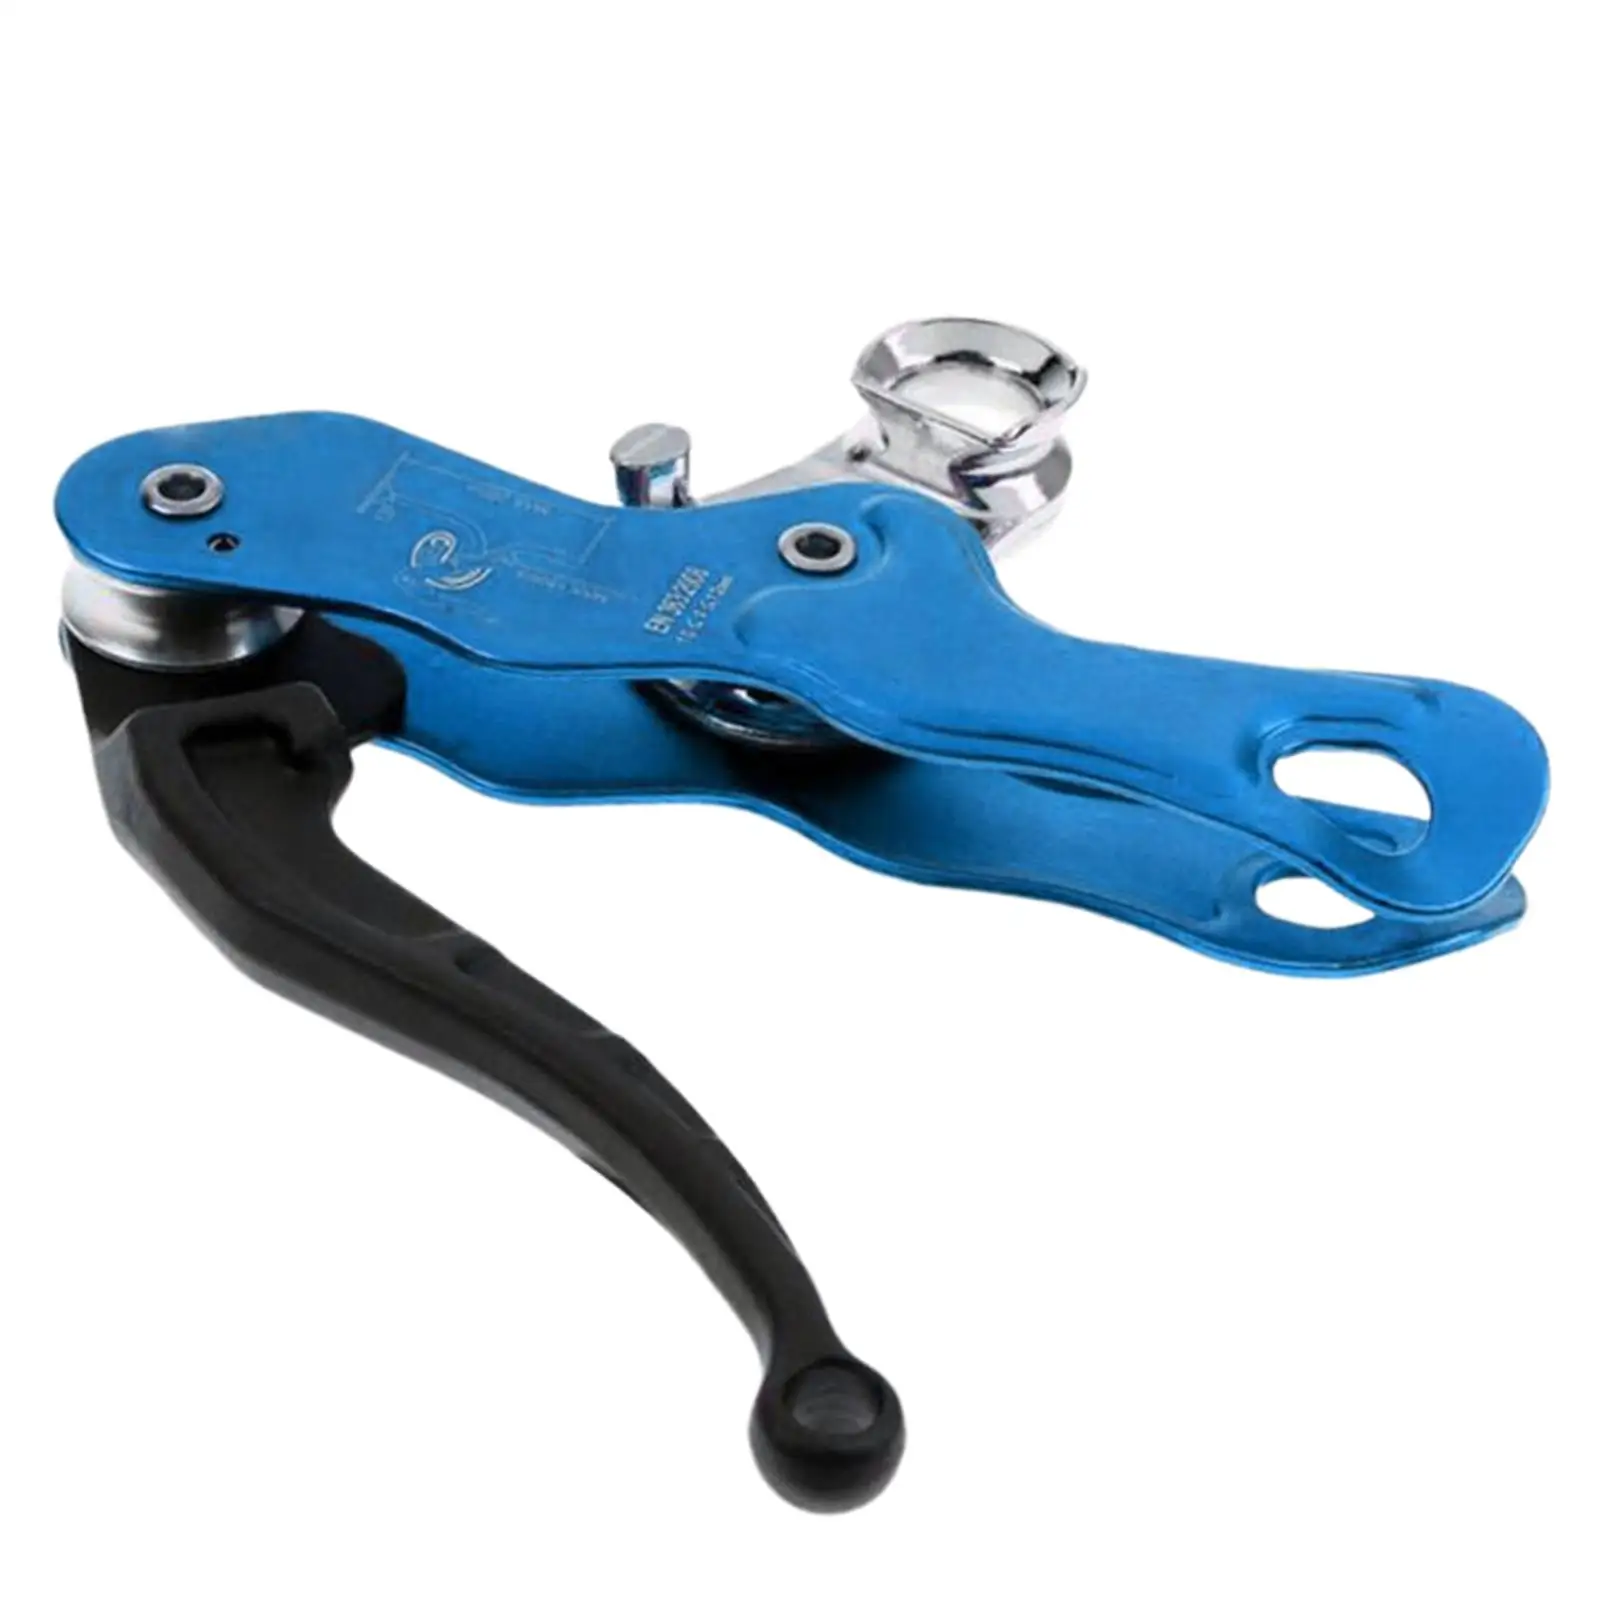 Climbing Descender, Self Locking Self Braking Belay Rappel Gear Belaying Hand Operated for Ropes 10-12mm for Outdoor Downhill